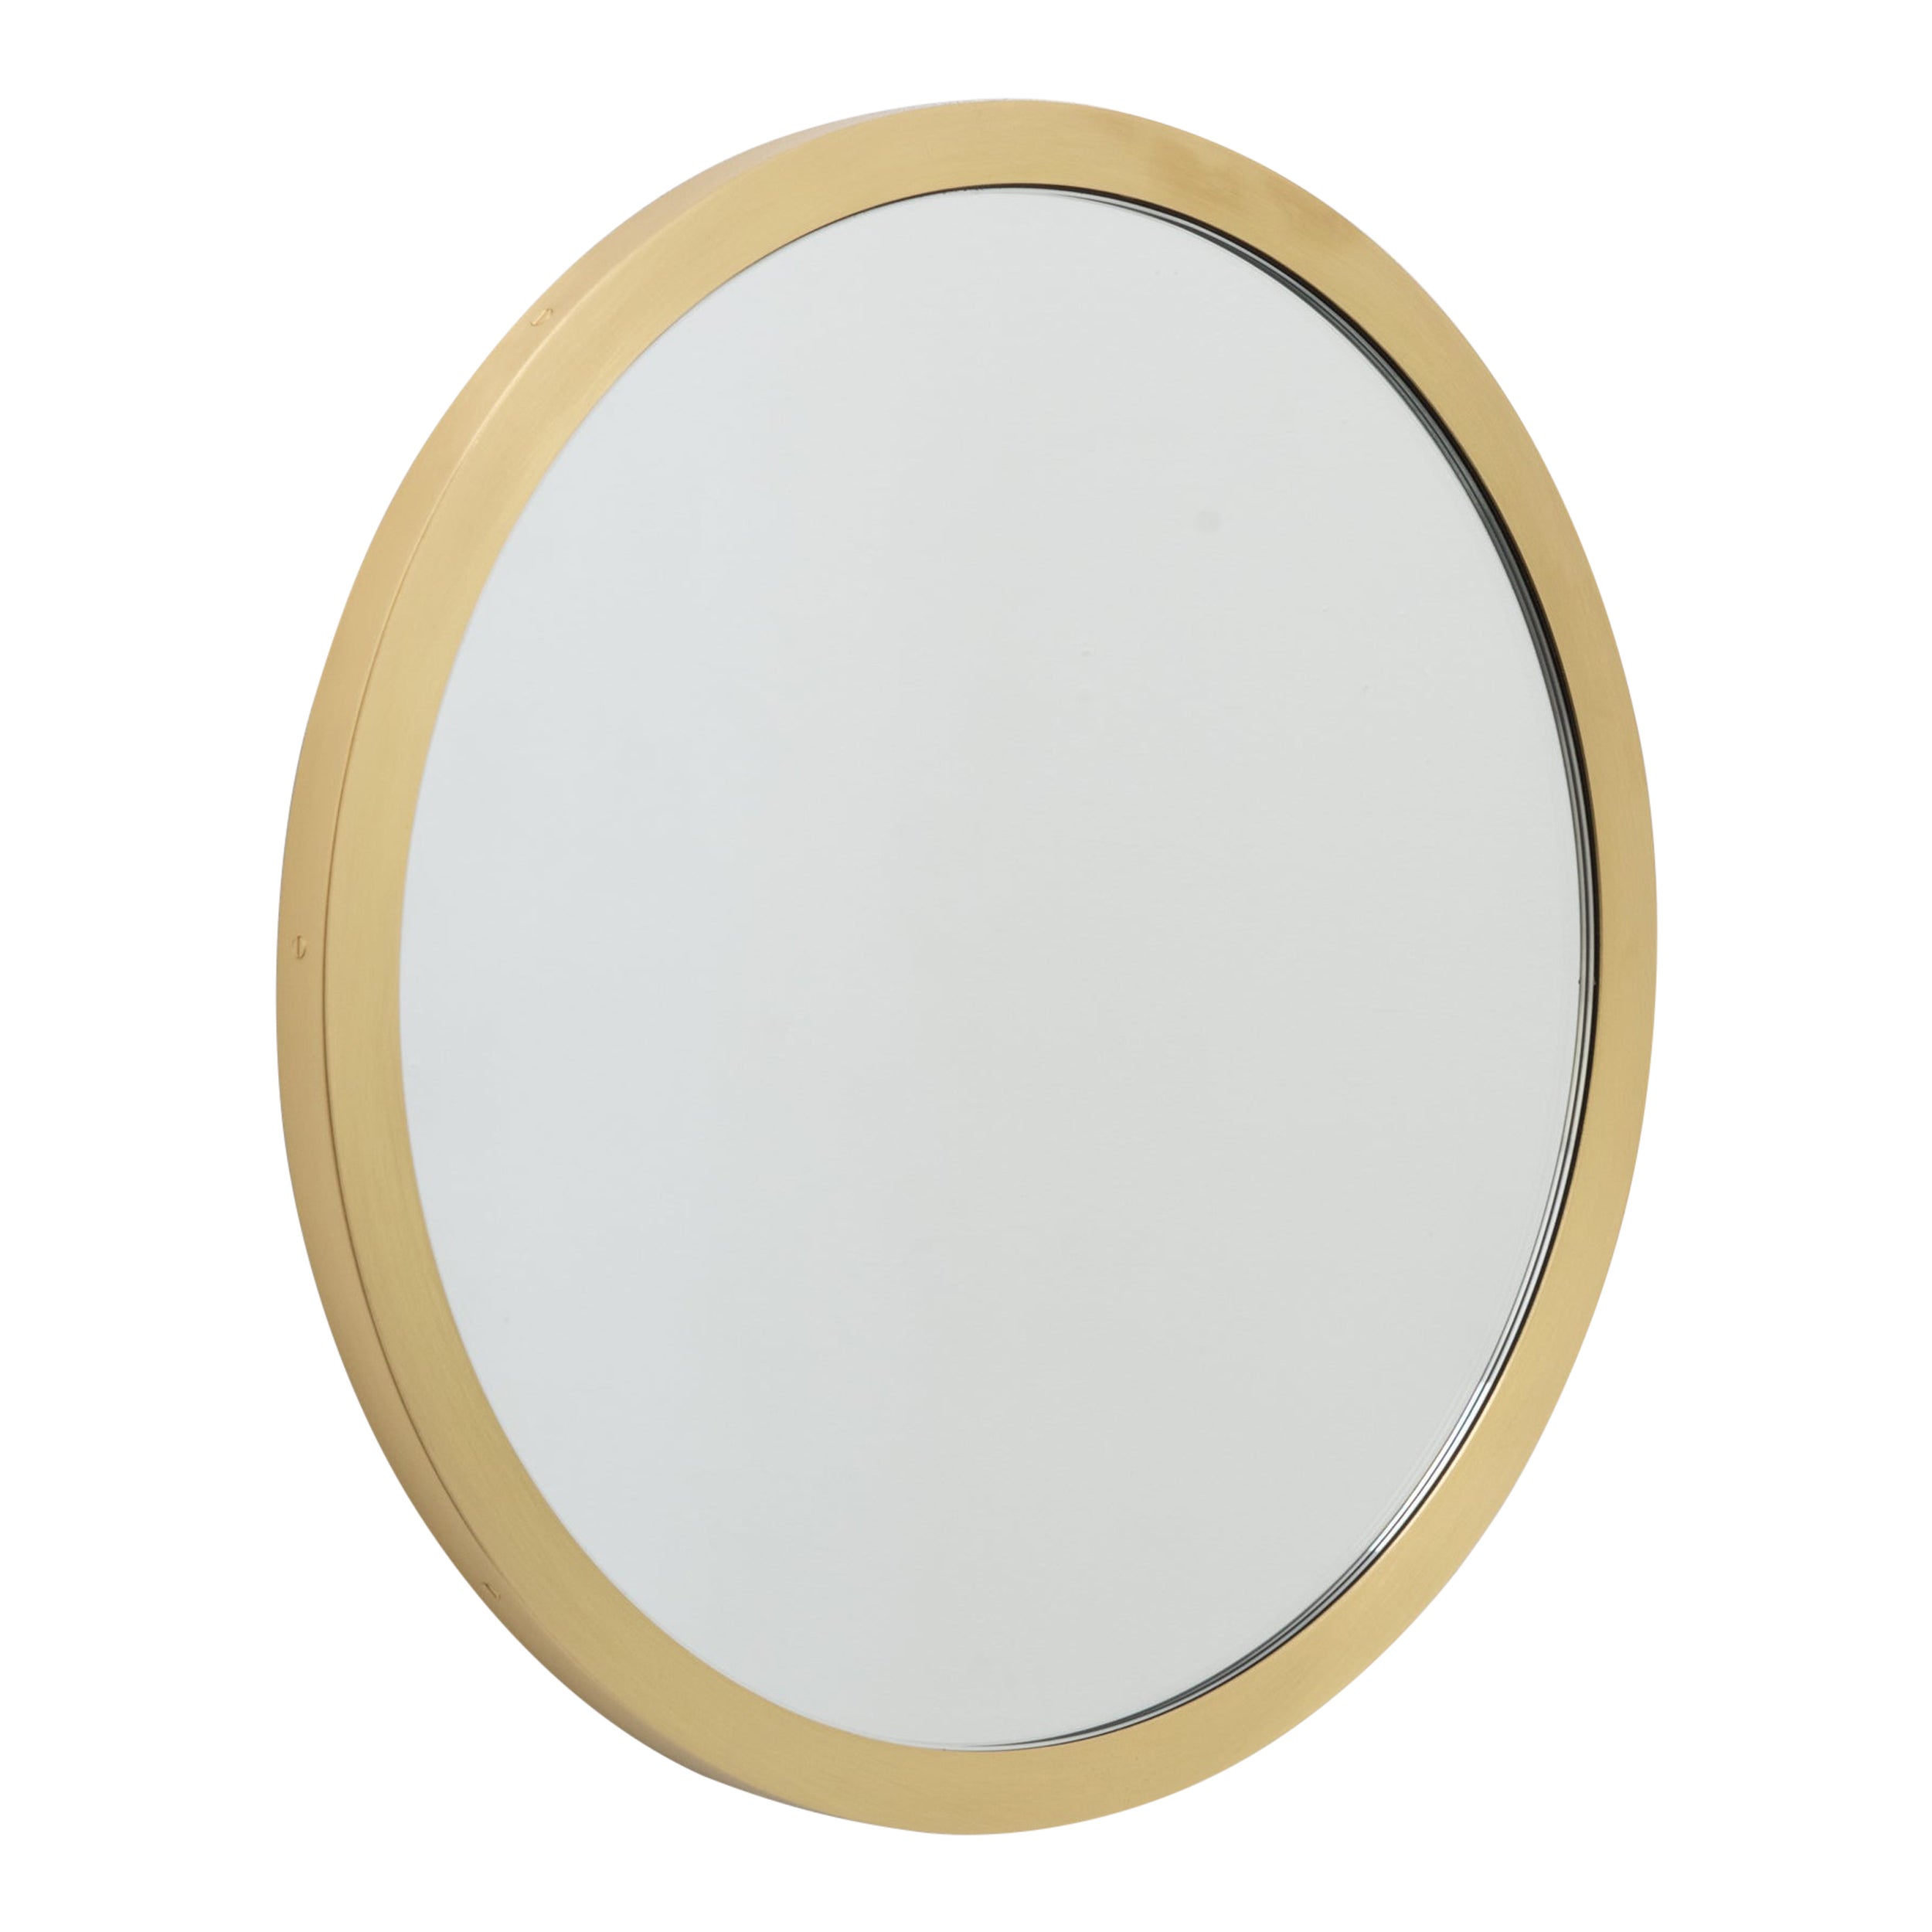 Orbis Round Contemporary Mirror with Full Brushed Brass Frame, Regular